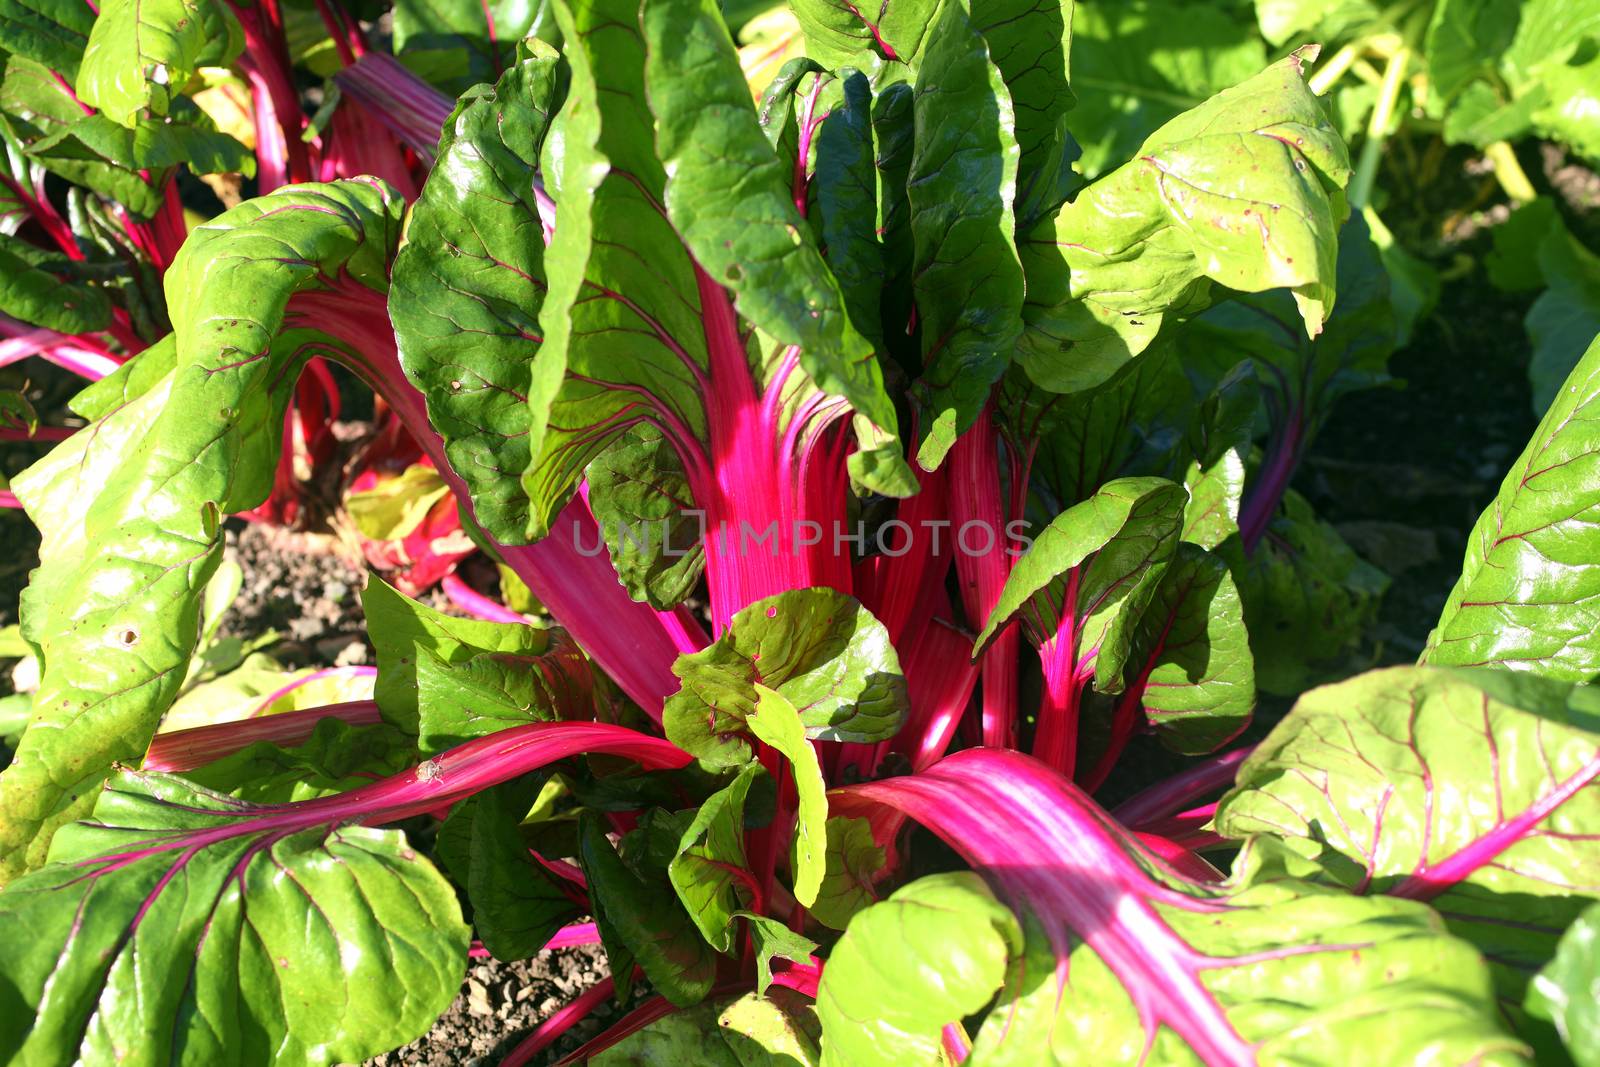 Swiss chard, Beta vulgaris subsp Cicla var flavescens 'Pink Pass by ant